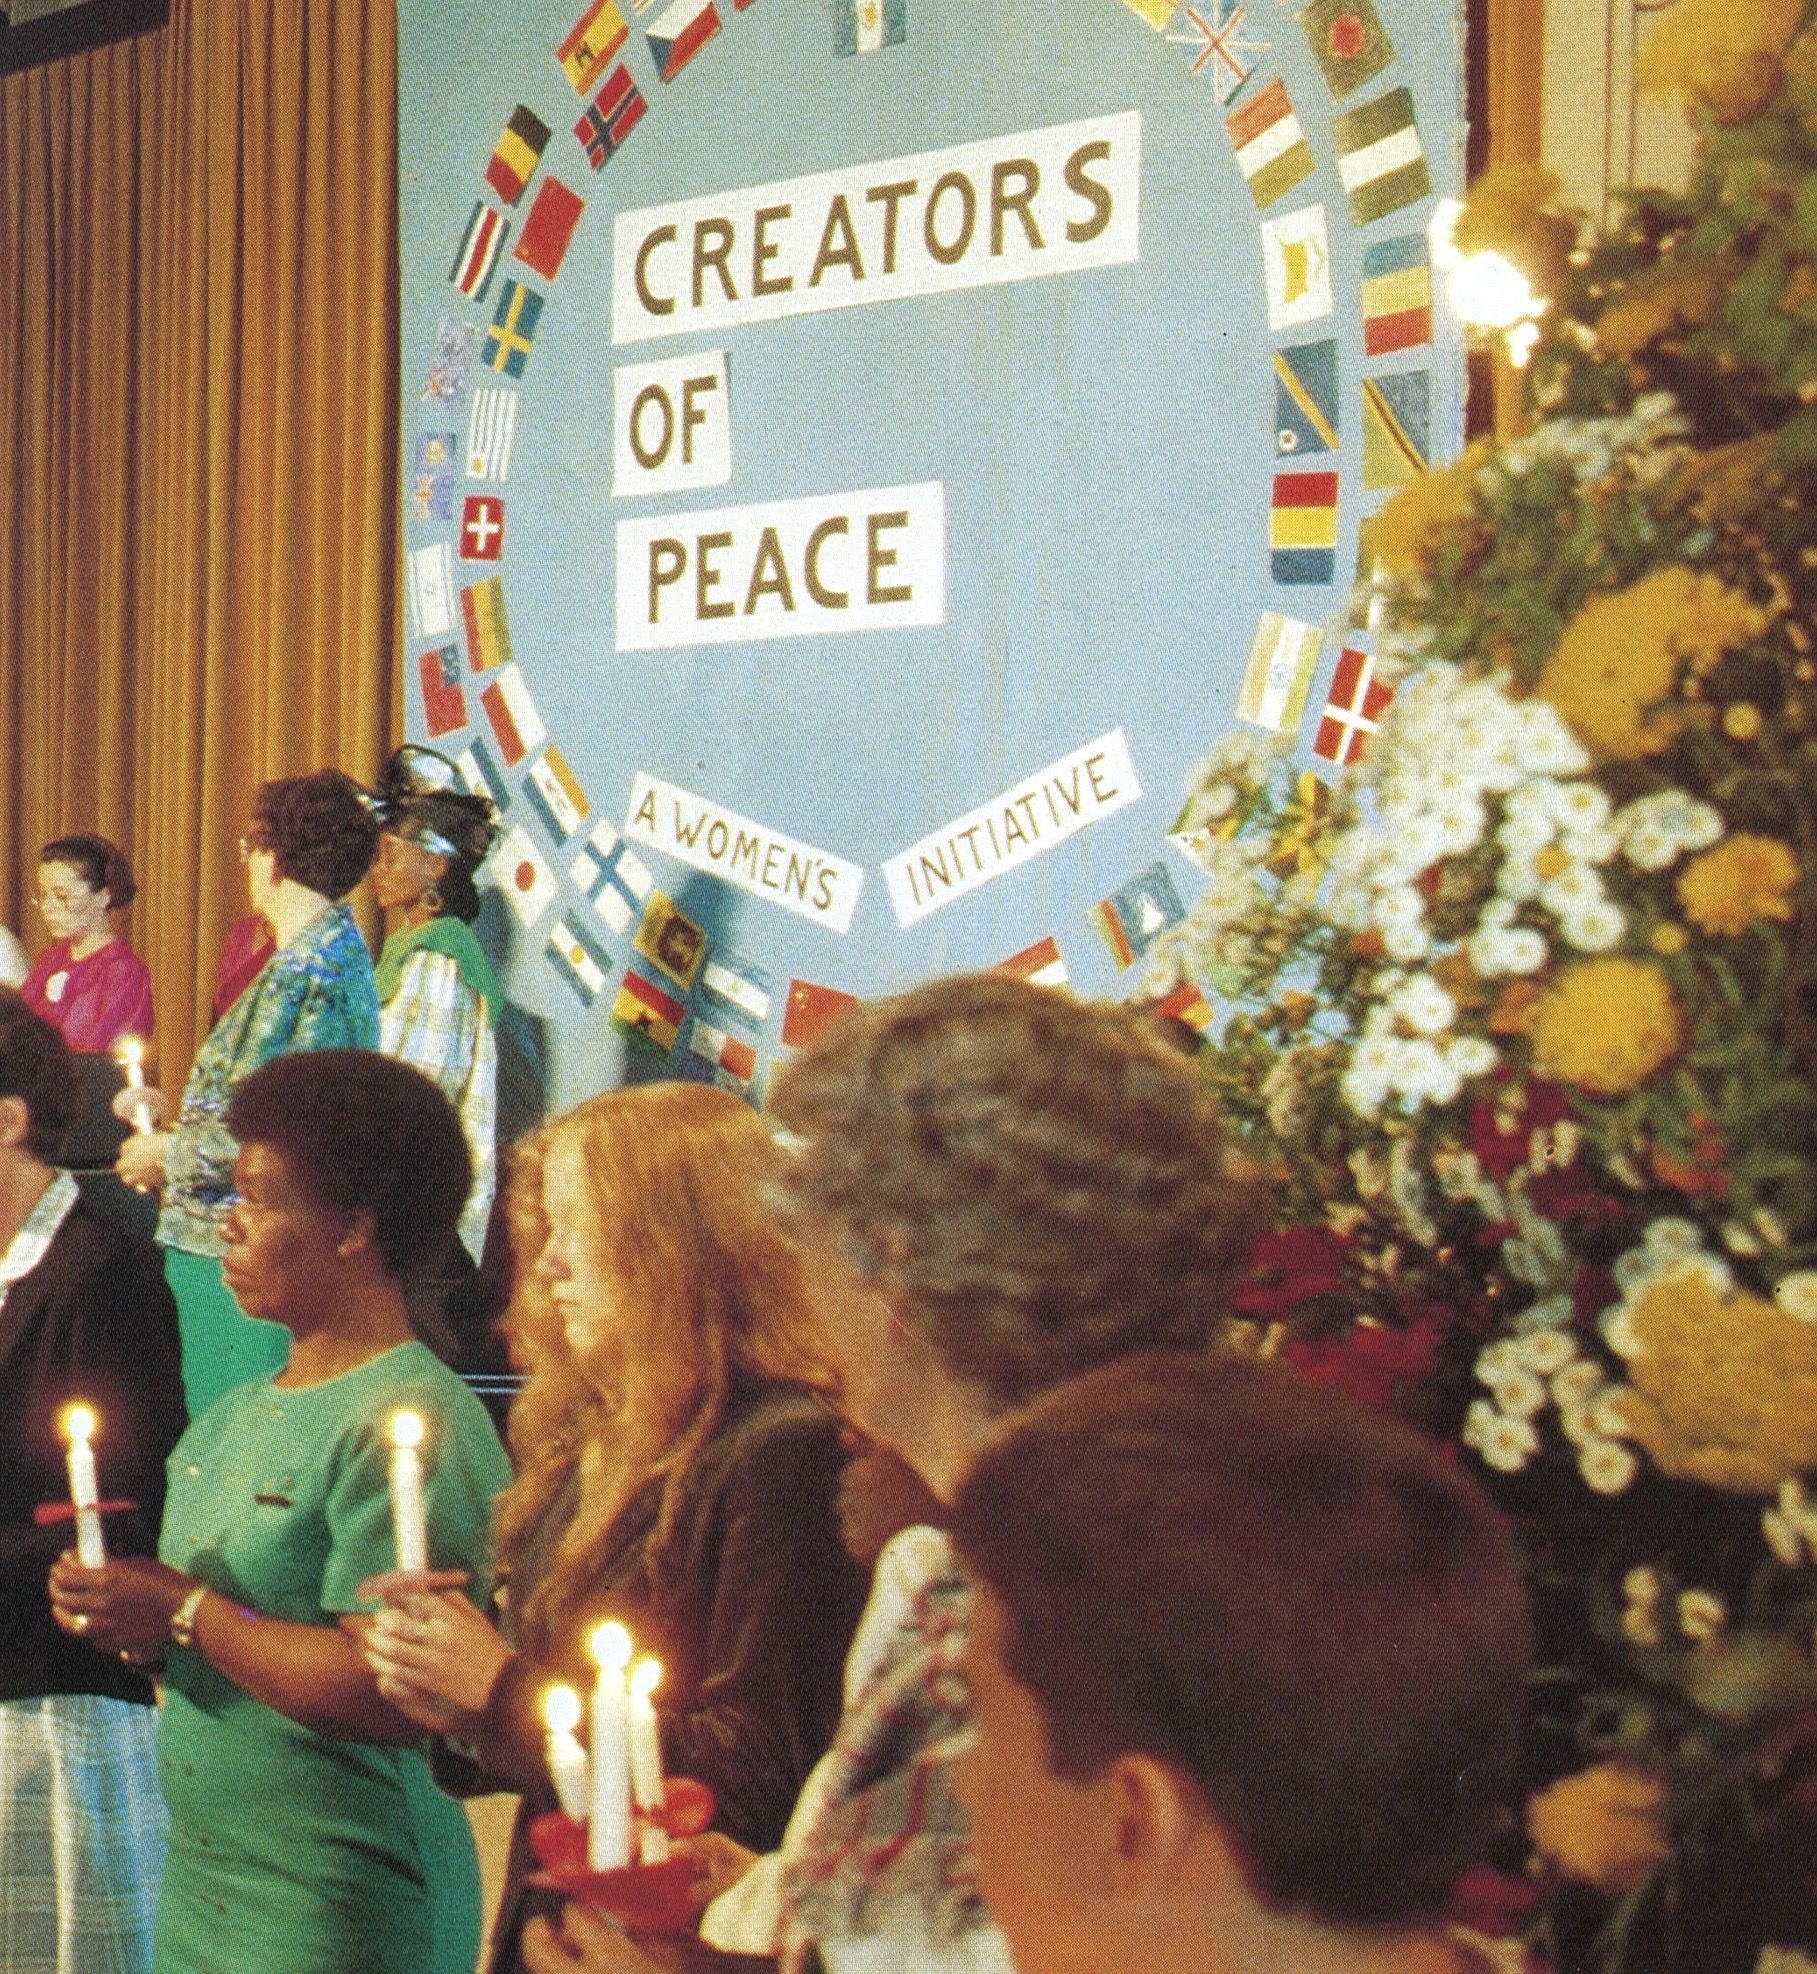 Launch of Creators of Peace in Caux 1991